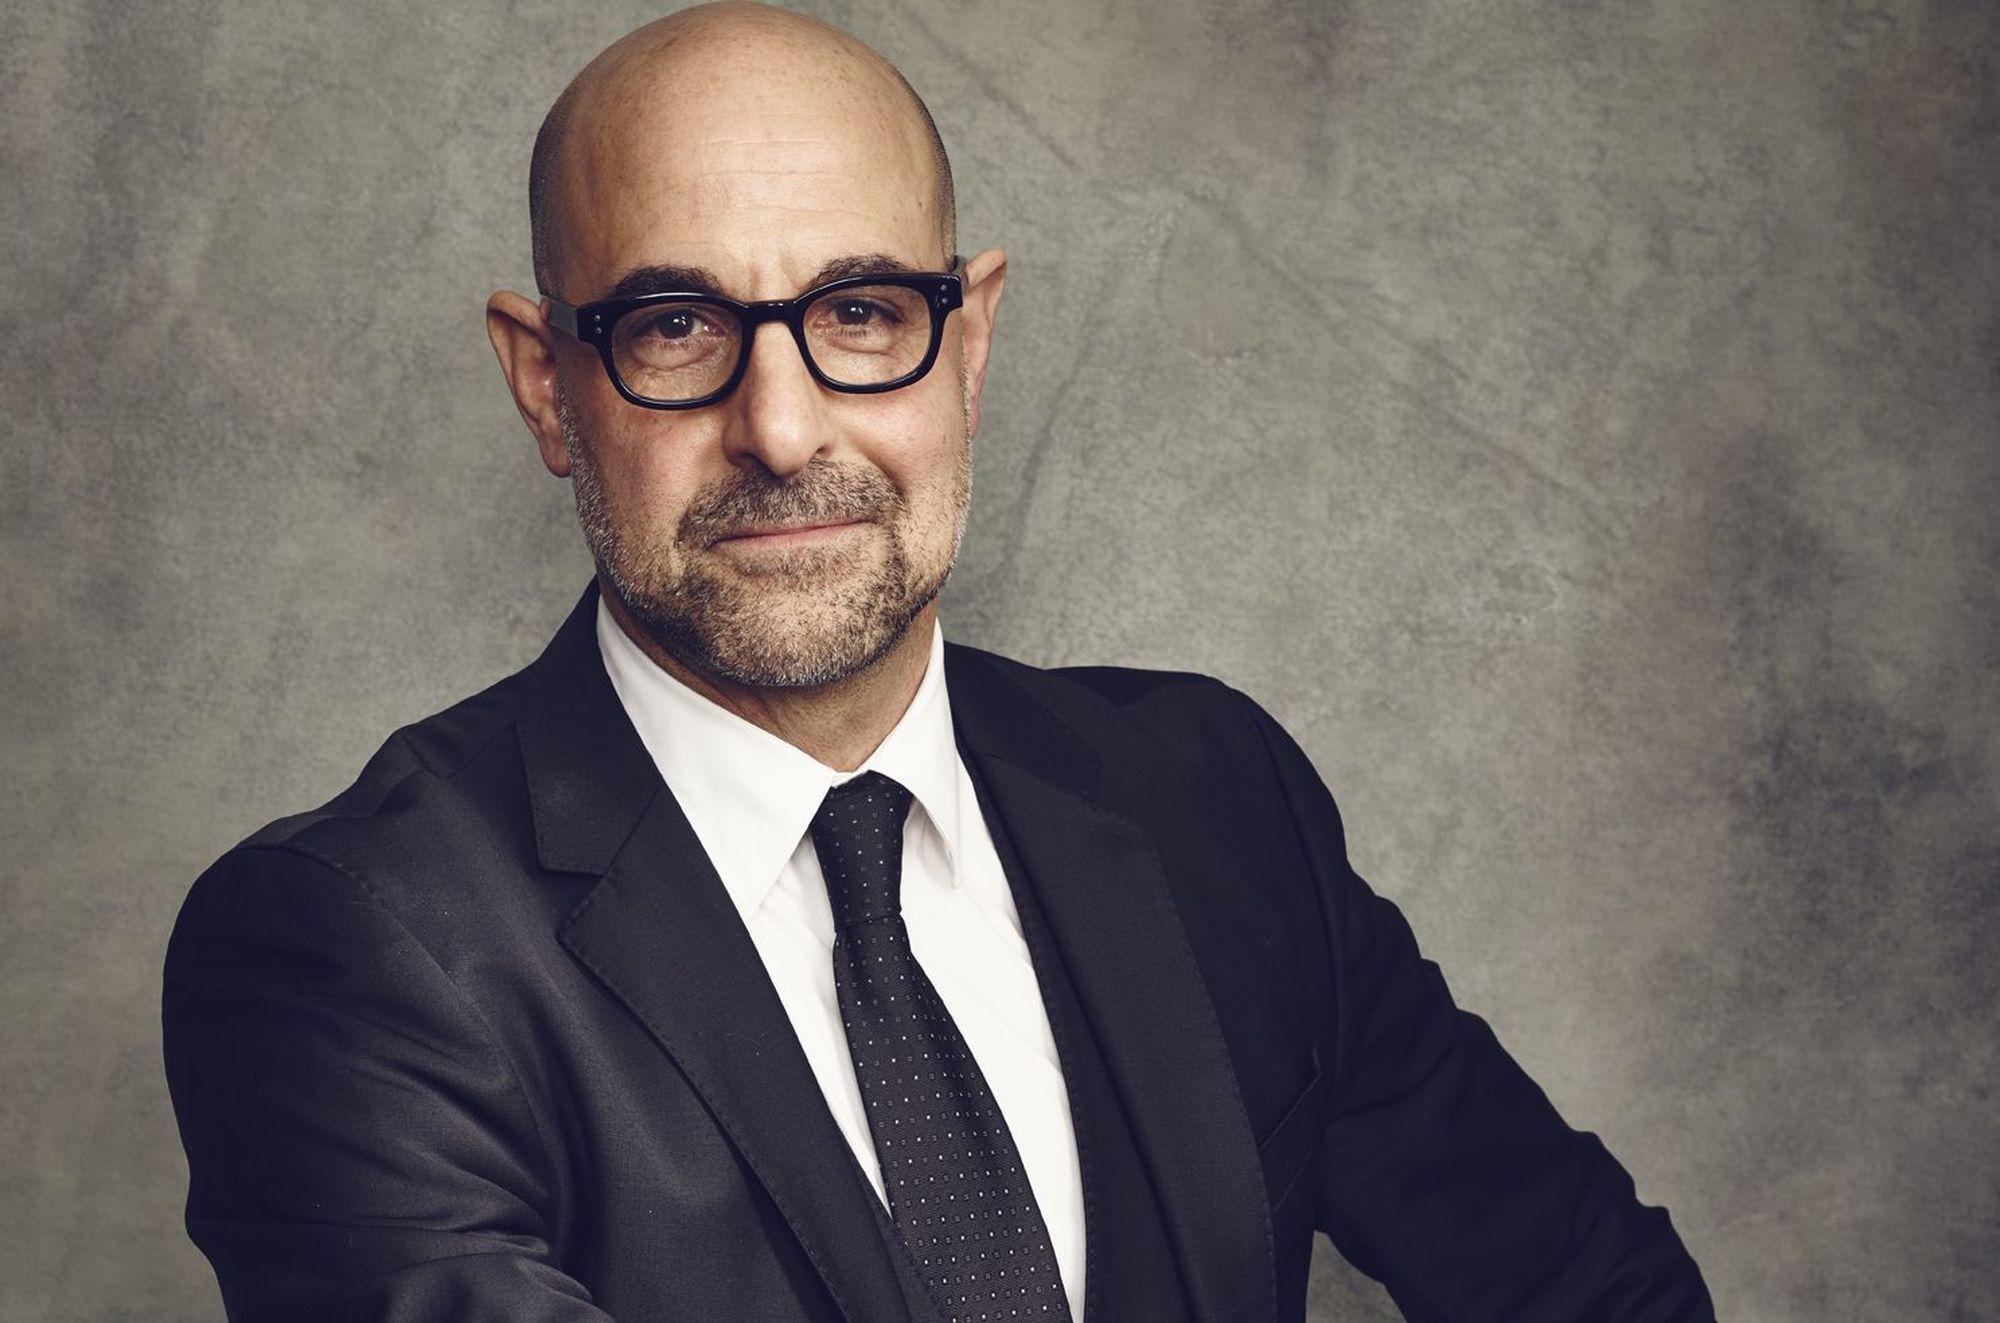 Stanley Tucci Wallpapers Image Photos Pictures Backgrounds.